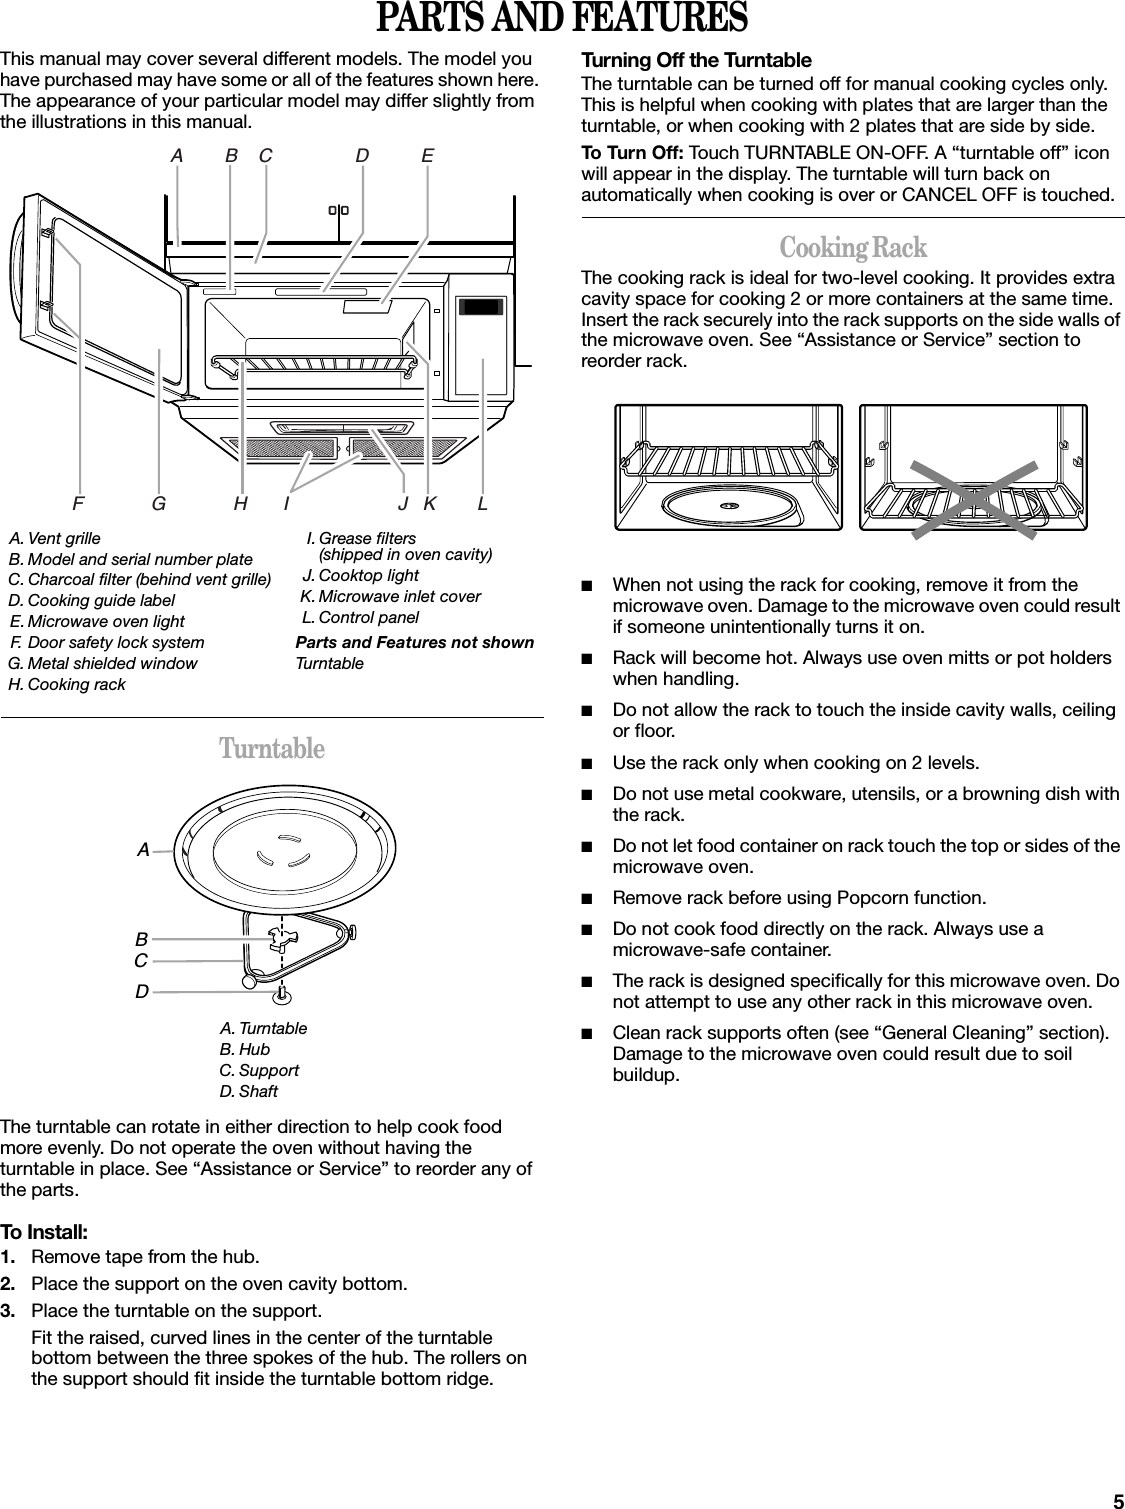 5PARTS AND FEATURESThis manual may cover several different models. The model you have purchased may have some or all of the features shown here. The appearance of your particular model may differ slightly from the illustrations in this manual.TurntableThe turntable can rotate in either direction to help cook food more evenly. Do not operate the oven without having the turntable in place. See “Assistance or Service” to reorder any of the parts.To Install:1. Remove tape from the hub.2. Place the support on the oven cavity bottom.3. Place the turntable on the support.Fit the raised, curved lines in the center of the turntable bottom between the three spokes of the hub. The rollers on the support should fit inside the turntable bottom ridge.Turning Off the TurntableThe turntable can be turned off for manual cooking cycles only. This is helpful when cooking with plates that are larger than the turntable, or when cooking with 2 plates that are side by side.To Turn Off: Touch TURNTABLE ON-OFF. A “turntable off” icon will appear in the display. The turntable will turn back on automatically when cooking is over or CANCEL OFF is touched.Cooking RackThe cooking rack is ideal for two-level cooking. It provides extra cavity space for cooking 2 or more containers at the same time. Insert the rack securely into the rack supports on the side walls of the microwave oven. See “Assistance or Service” section to reorder rack.■When not using the rack for cooking, remove it from the microwave oven. Damage to the microwave oven could result if someone unintentionally turns it on.■Rack will become hot. Always use oven mitts or pot holders when handling.■Do not allow the rack to touch the inside cavity walls, ceiling or floor.■Use the rack only when cooking on 2 levels.■Do not use metal cookware, utensils, or a browning dish with the rack.■Do not let food container on rack touch the top or sides of the microwave oven.■Remove rack before using Popcorn function.■Do not cook food directly on the rack. Always use a microwave-safe container.■The rack is designed specifically for this microwave oven. Do not attempt to use any other rack in this microwave oven.■Clean rack supports often (see “General Cleaning” section). Damage to the microwave oven could result due to soil buildup.A. Vent grilleB. Model and serial number plateC. Charcoal filter (behind vent grille)D. Cooking guide labelE. Microwave oven lightF. Door safety lock systemG. Metal shielded windowH. Cooking rackI. Grease filters (shipped in oven cavity)J. Cooktop lightK. Microwave inlet coverL. Control panelParts and Features not shownTurntableA. TurntableB. HubC. SupportD. ShaftA        B    C                D          EF             G             H       I                     J   K        LABCD